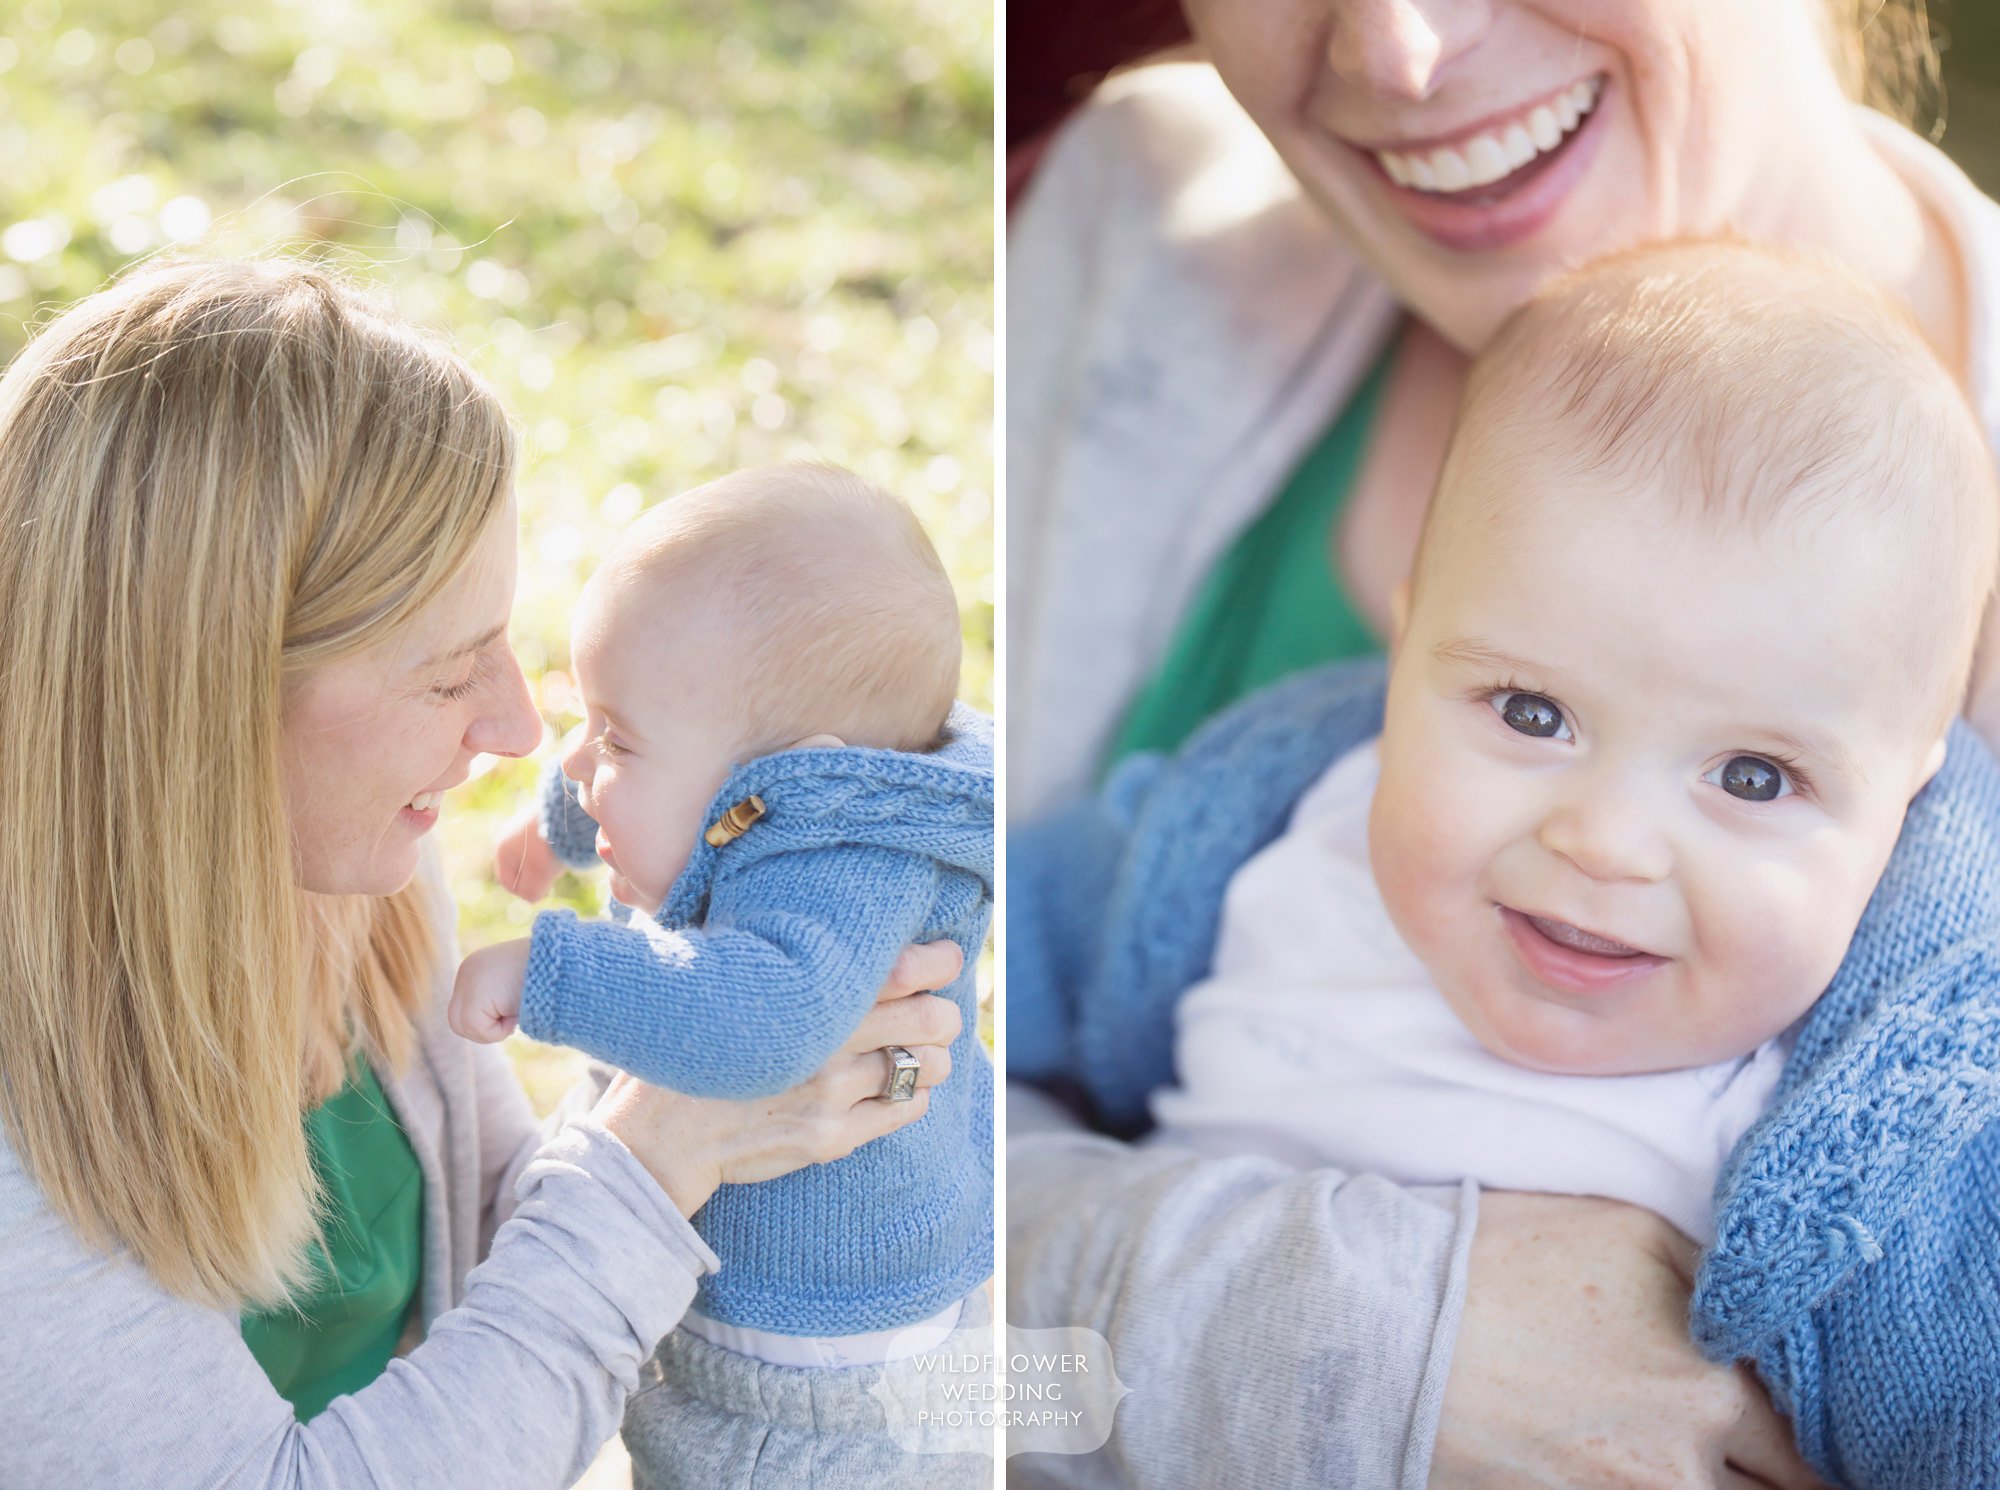 Sweet candid moments of mom and baby during this natural family photo shoot in KC, MO.